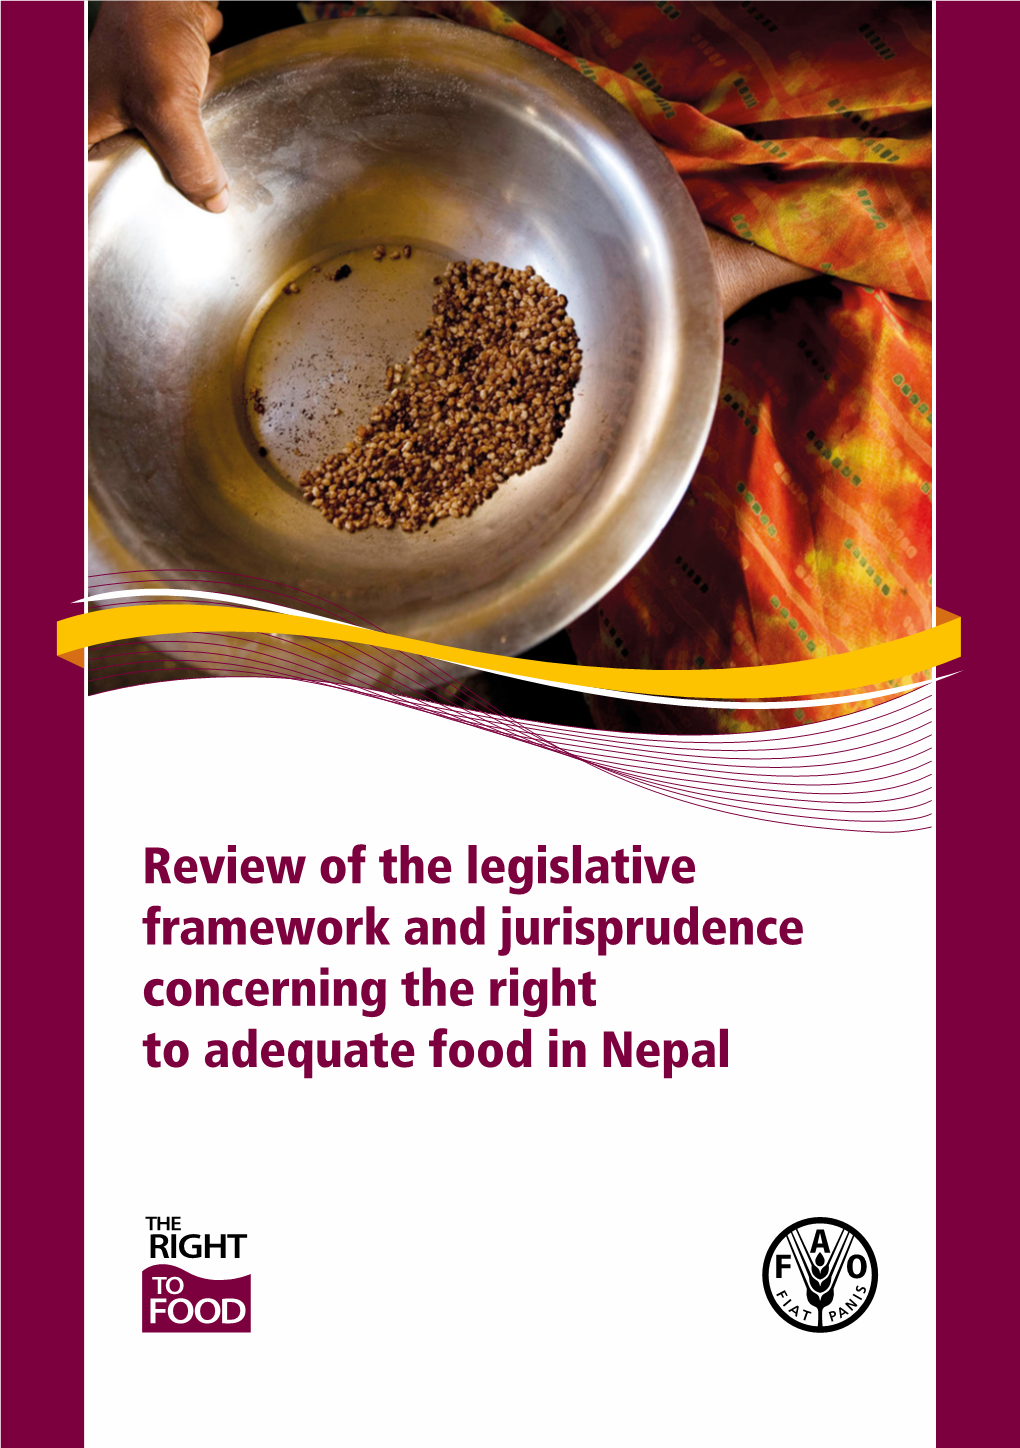 Review of the Legislative Framework and Jurisprudence Concerning the Right to Adequate Food in Nepal